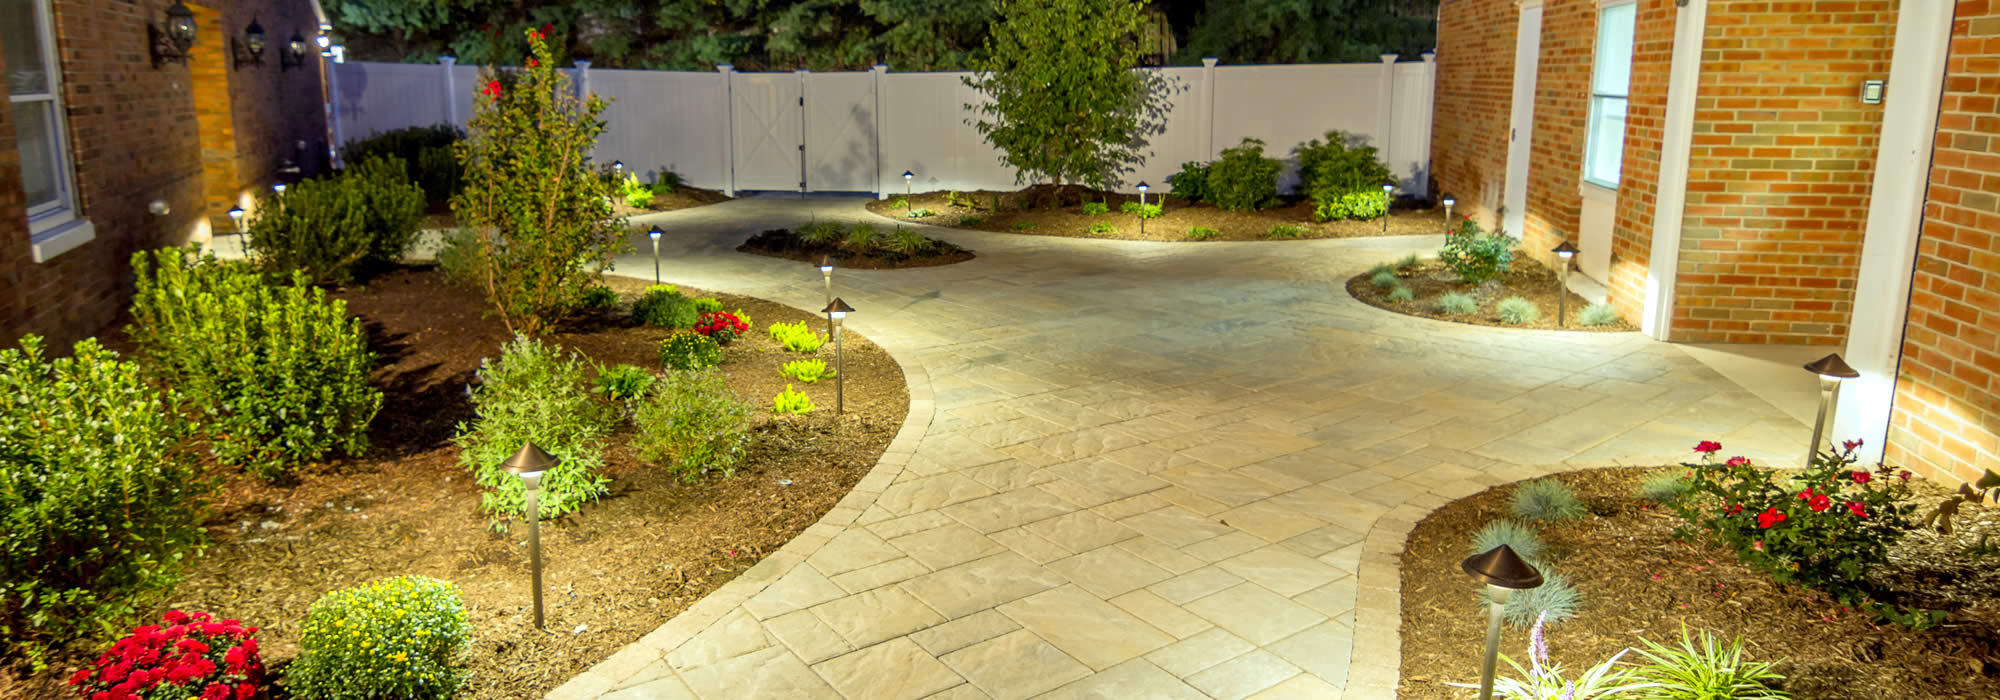 Landscaping Services in McFarland